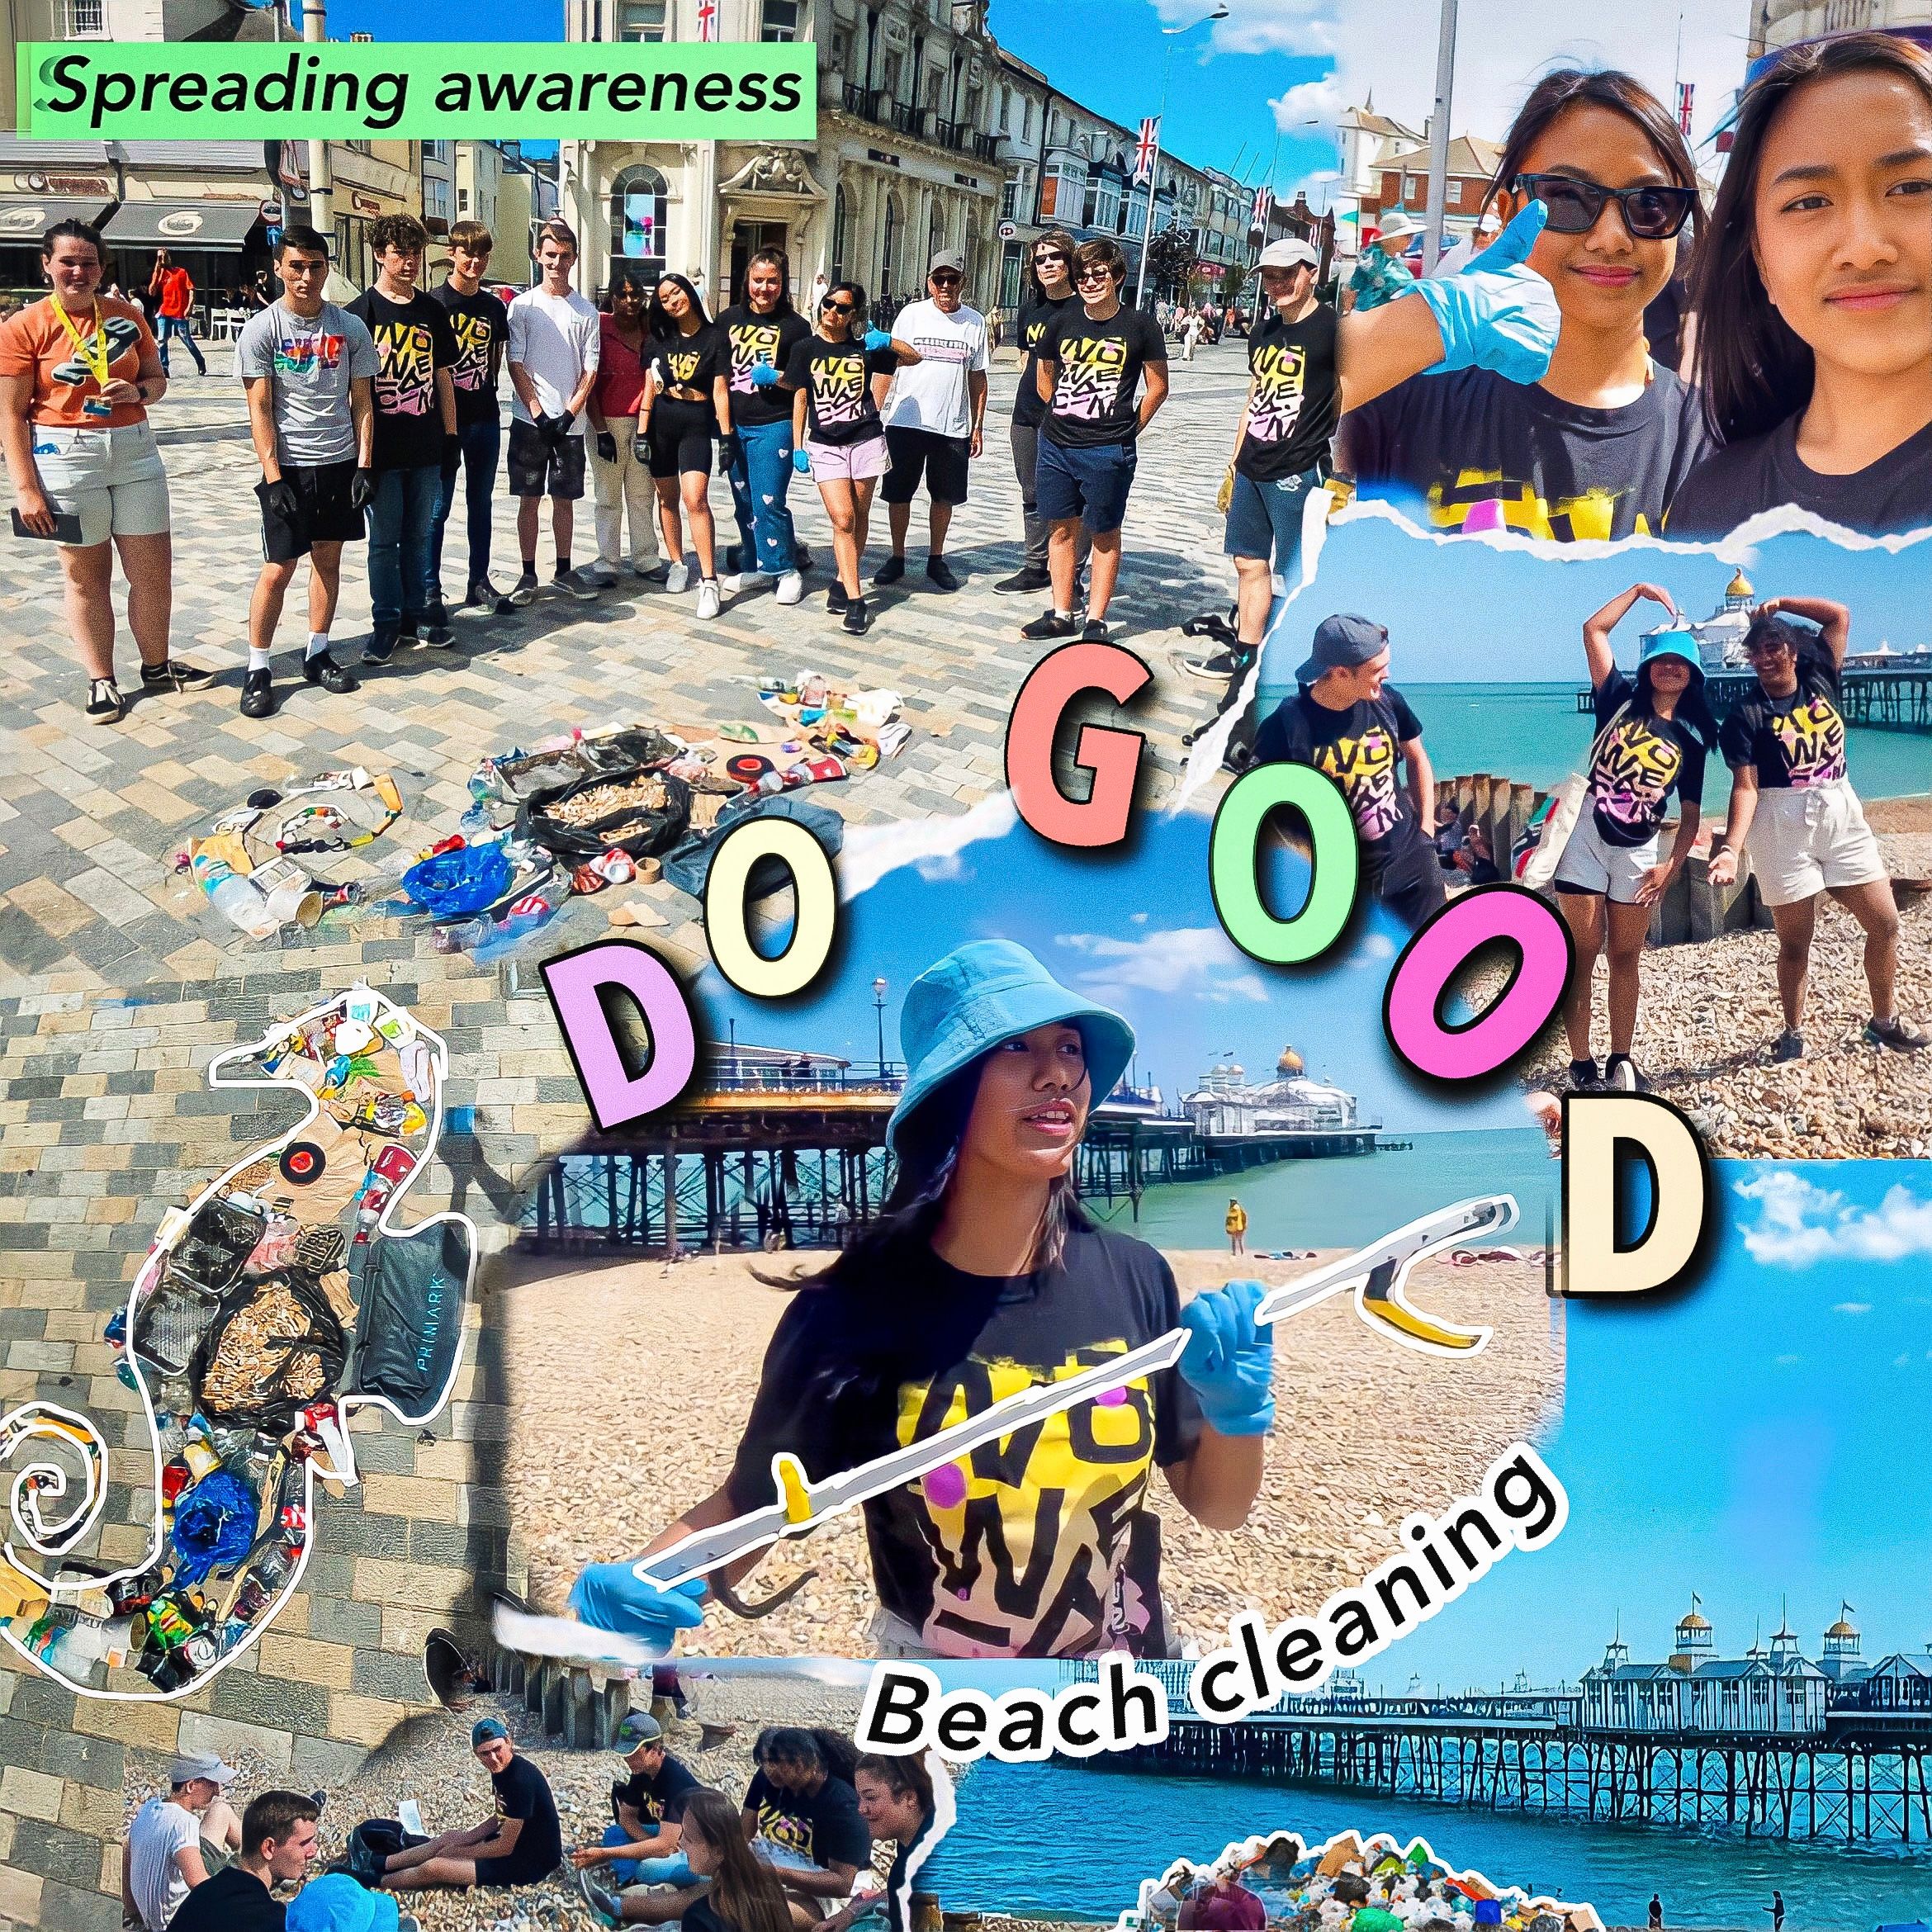 Young people spreading awareness on the beach by volunteering to clean it